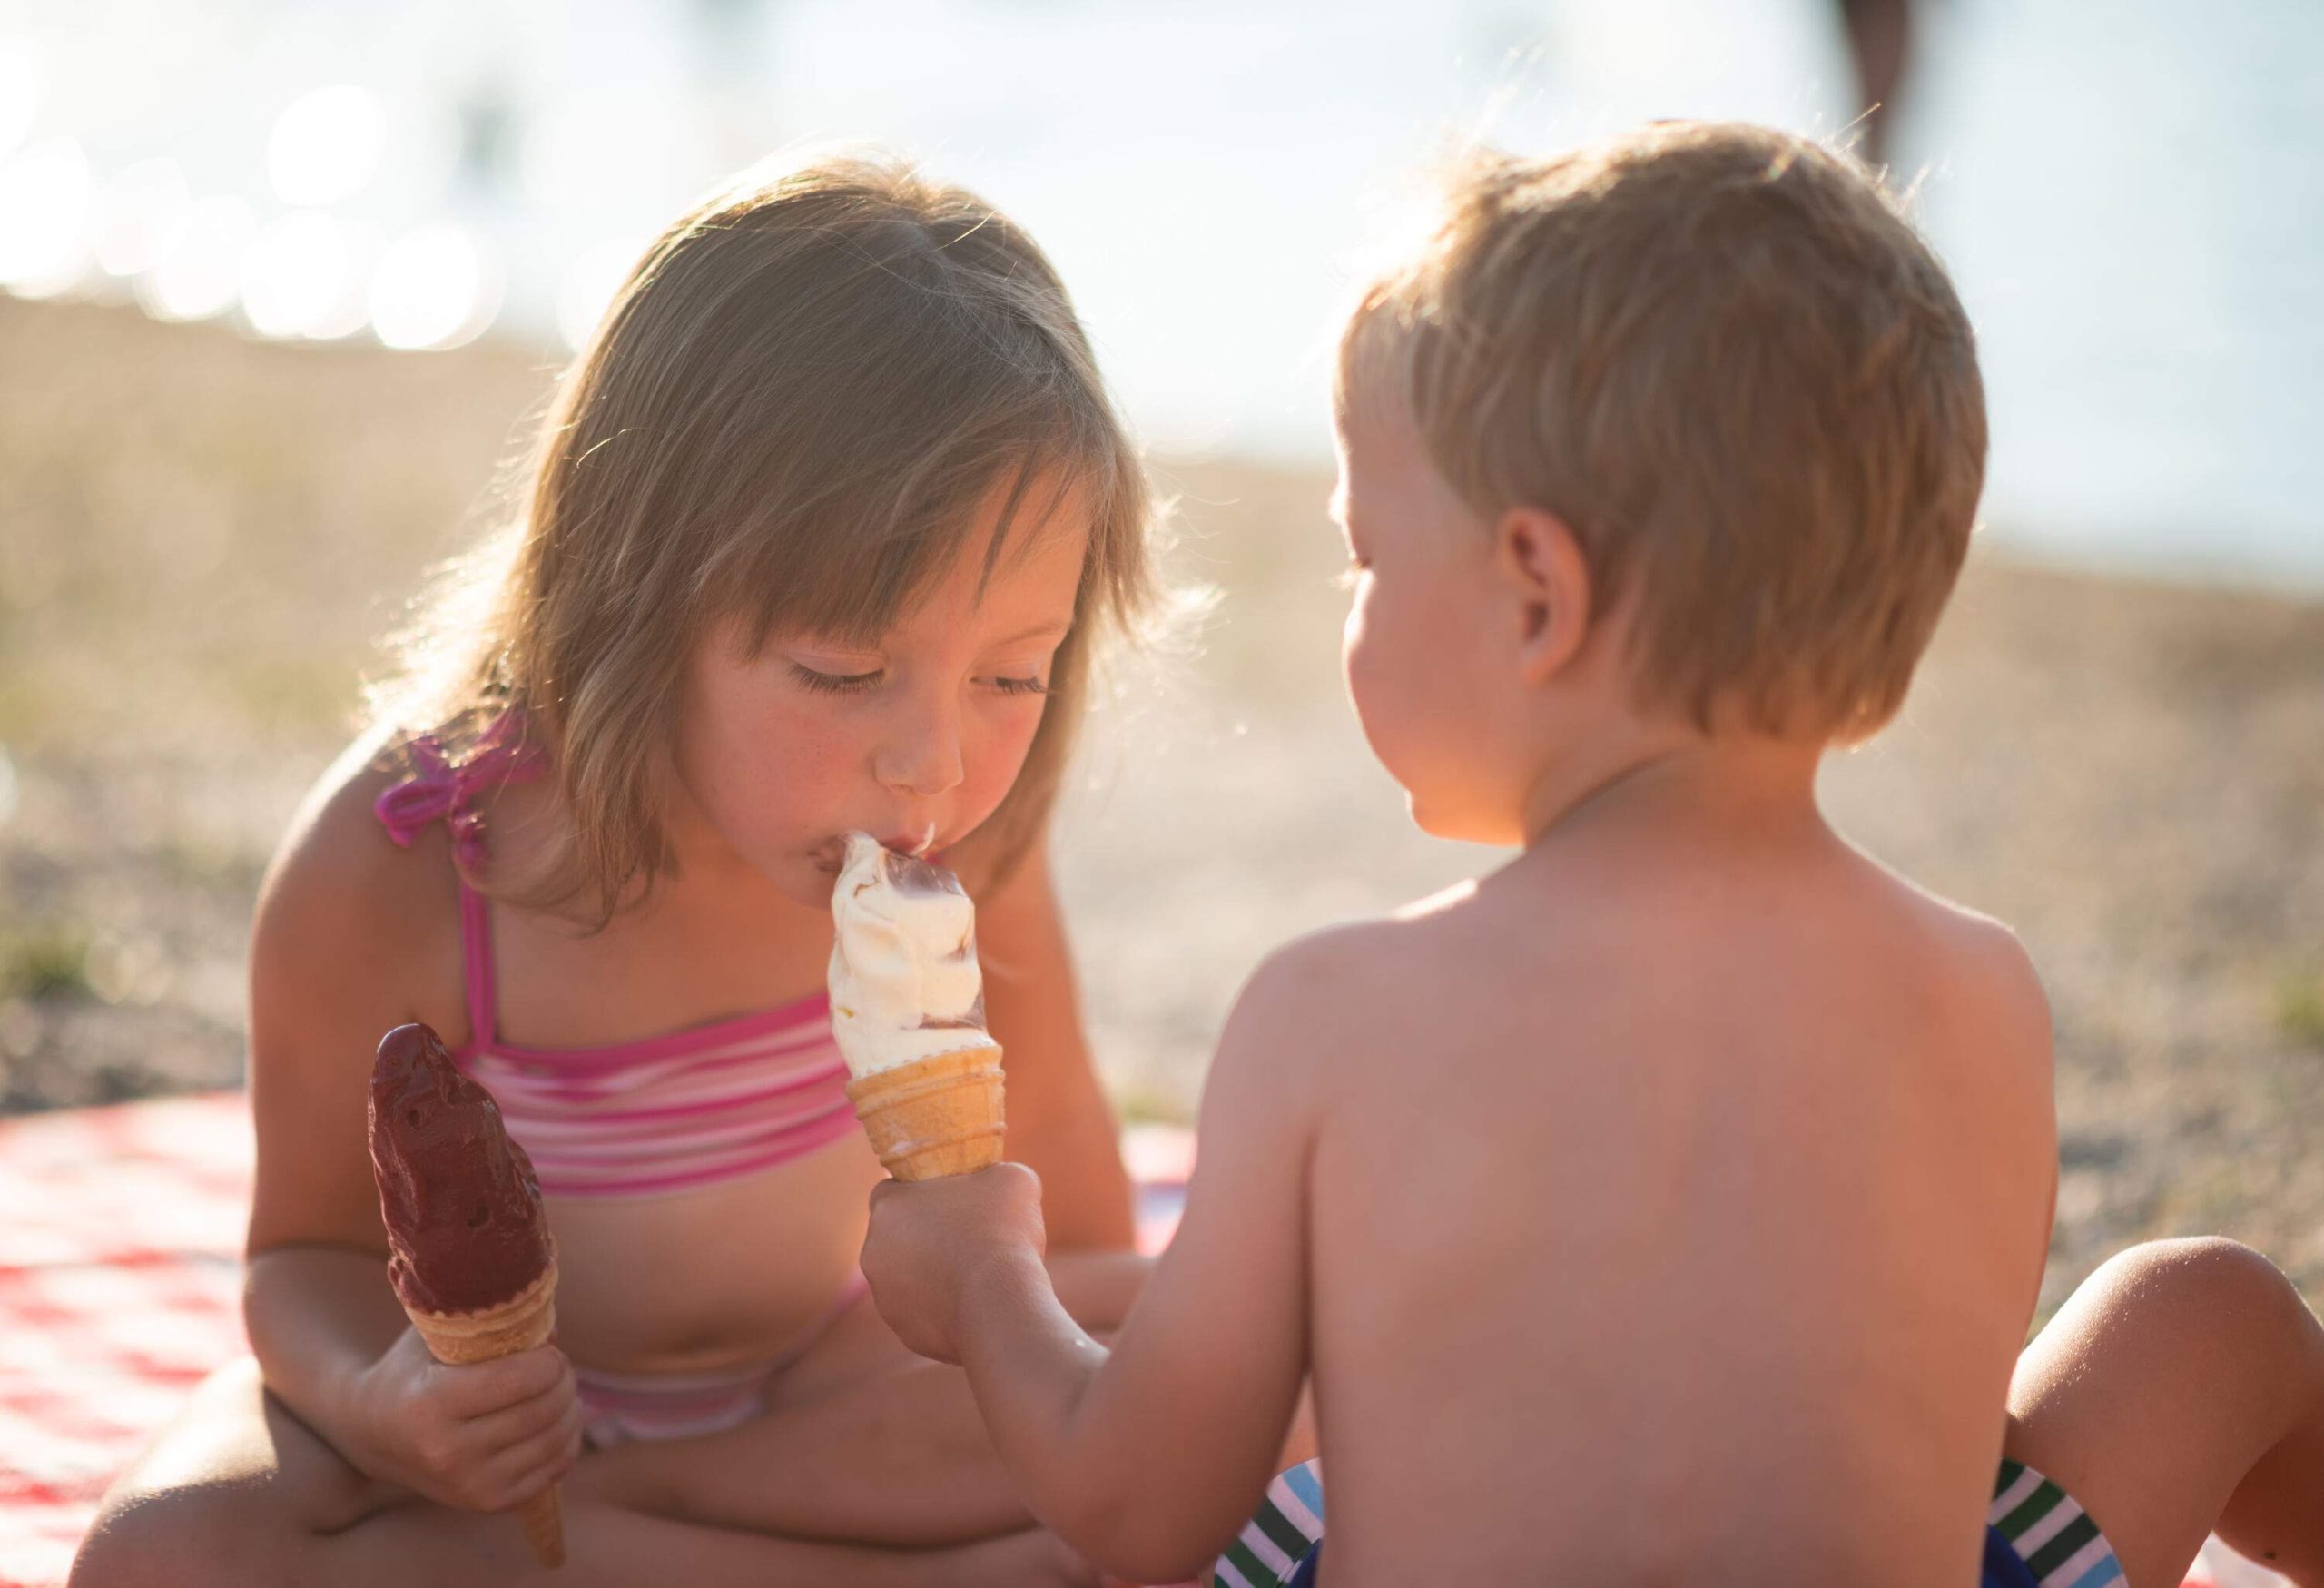 Siblings bond on the beach while enjoying cone ice cream, one playfully tasting the other's treat as they willingly share.